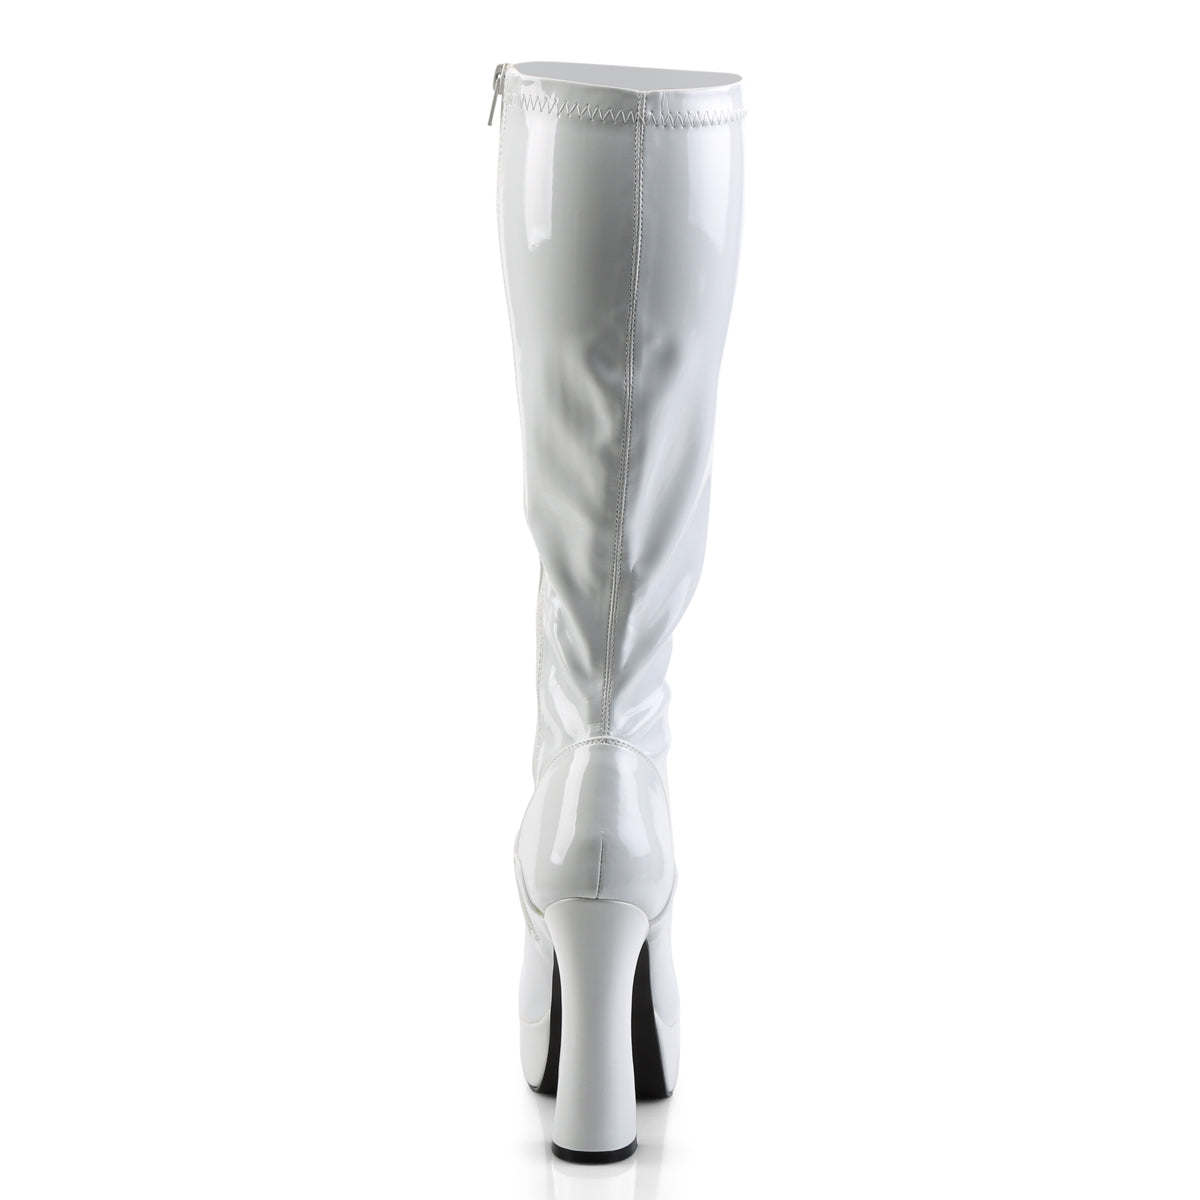 ELECTRA-2000Z 5" Heel White Patent Pole Dancing Platforms-Pleaser- Sexy Shoes Fetish Footwear